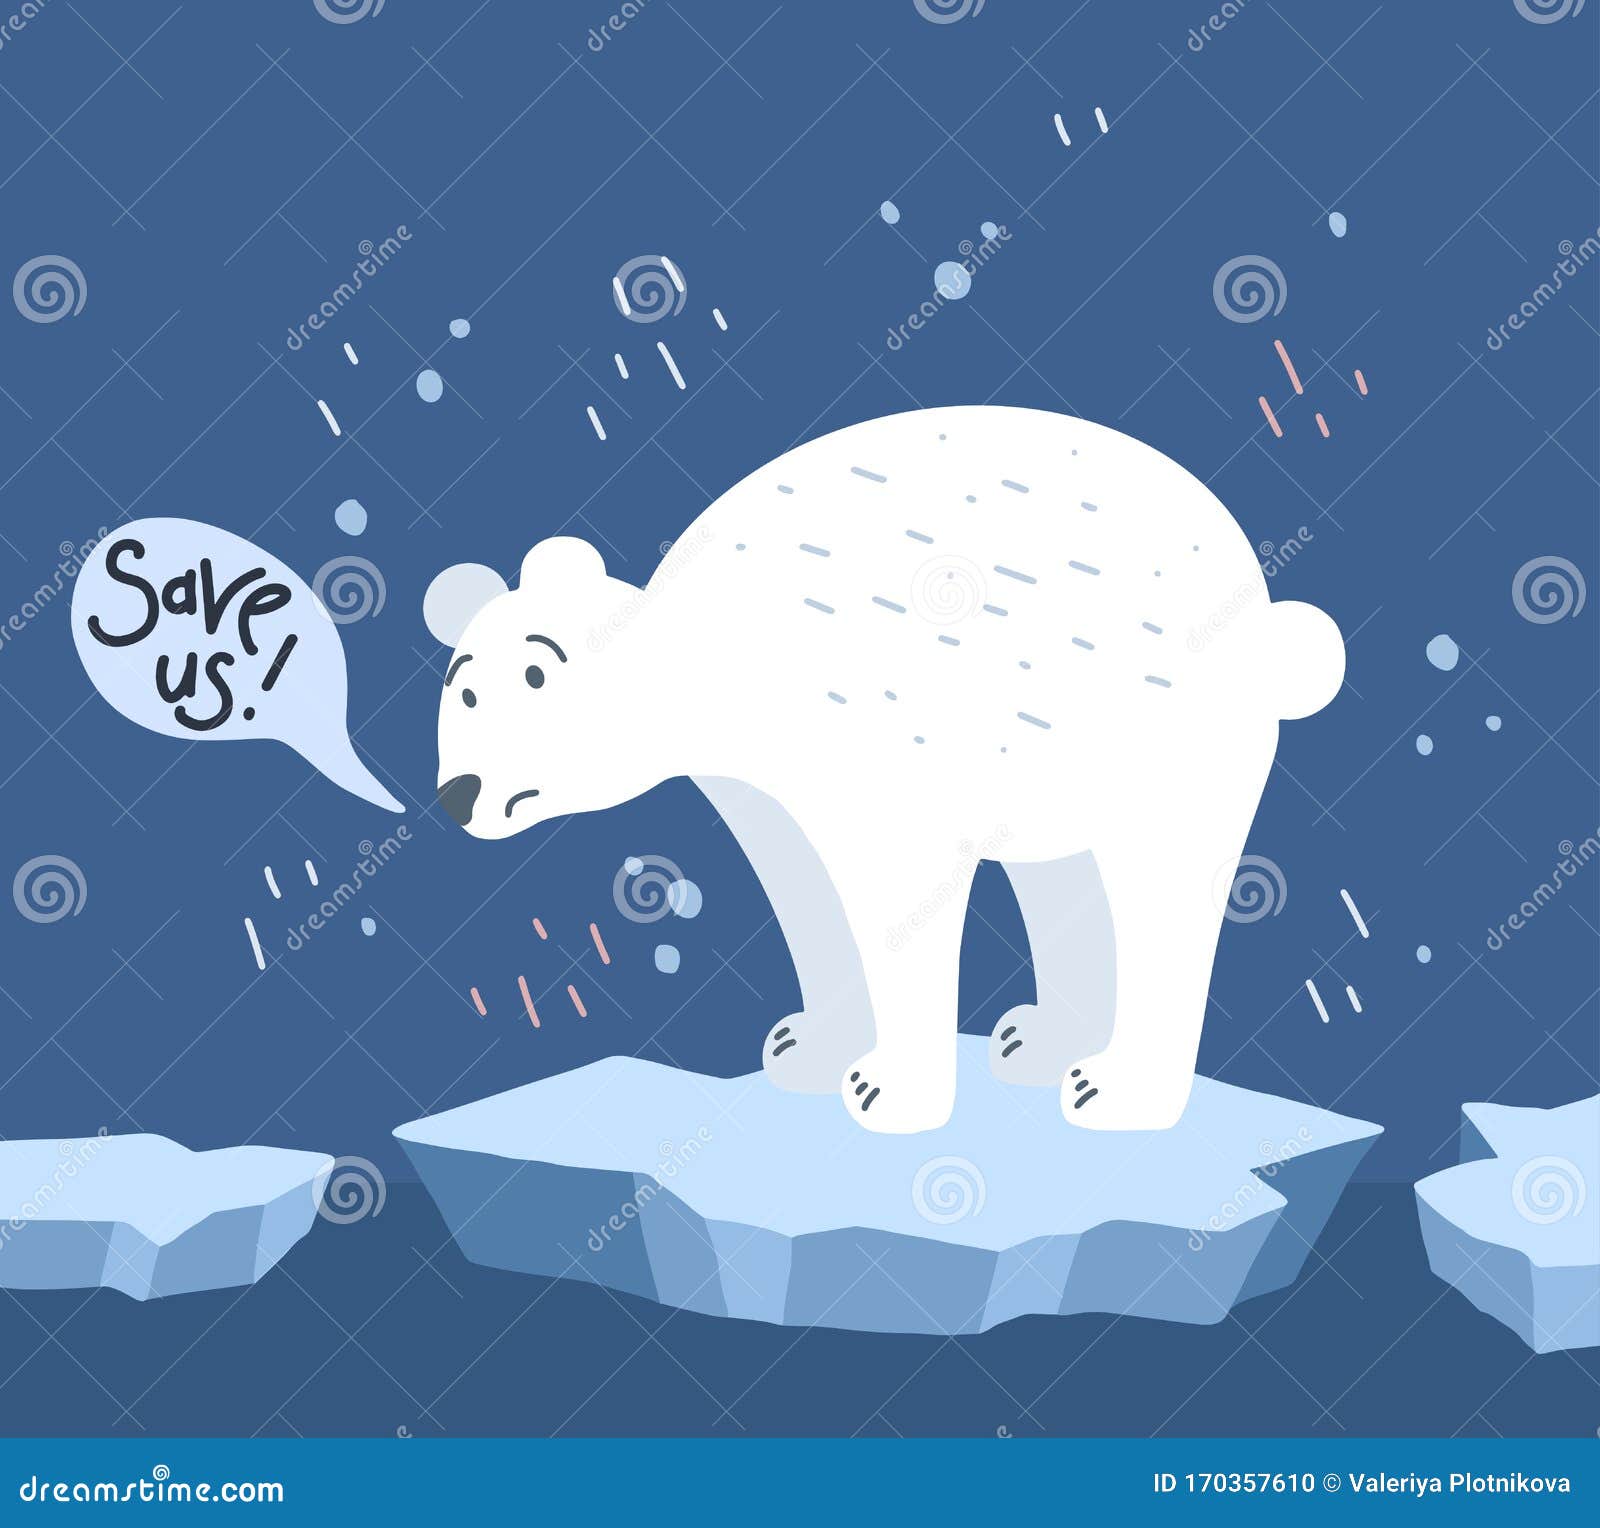 Global Warming. Cartoon Doodle Illustration of a Sad Bear on Melted Ice  with Speech Bubble. Save Us Stock Vector - Illustration of melt, cartoon:  170357610